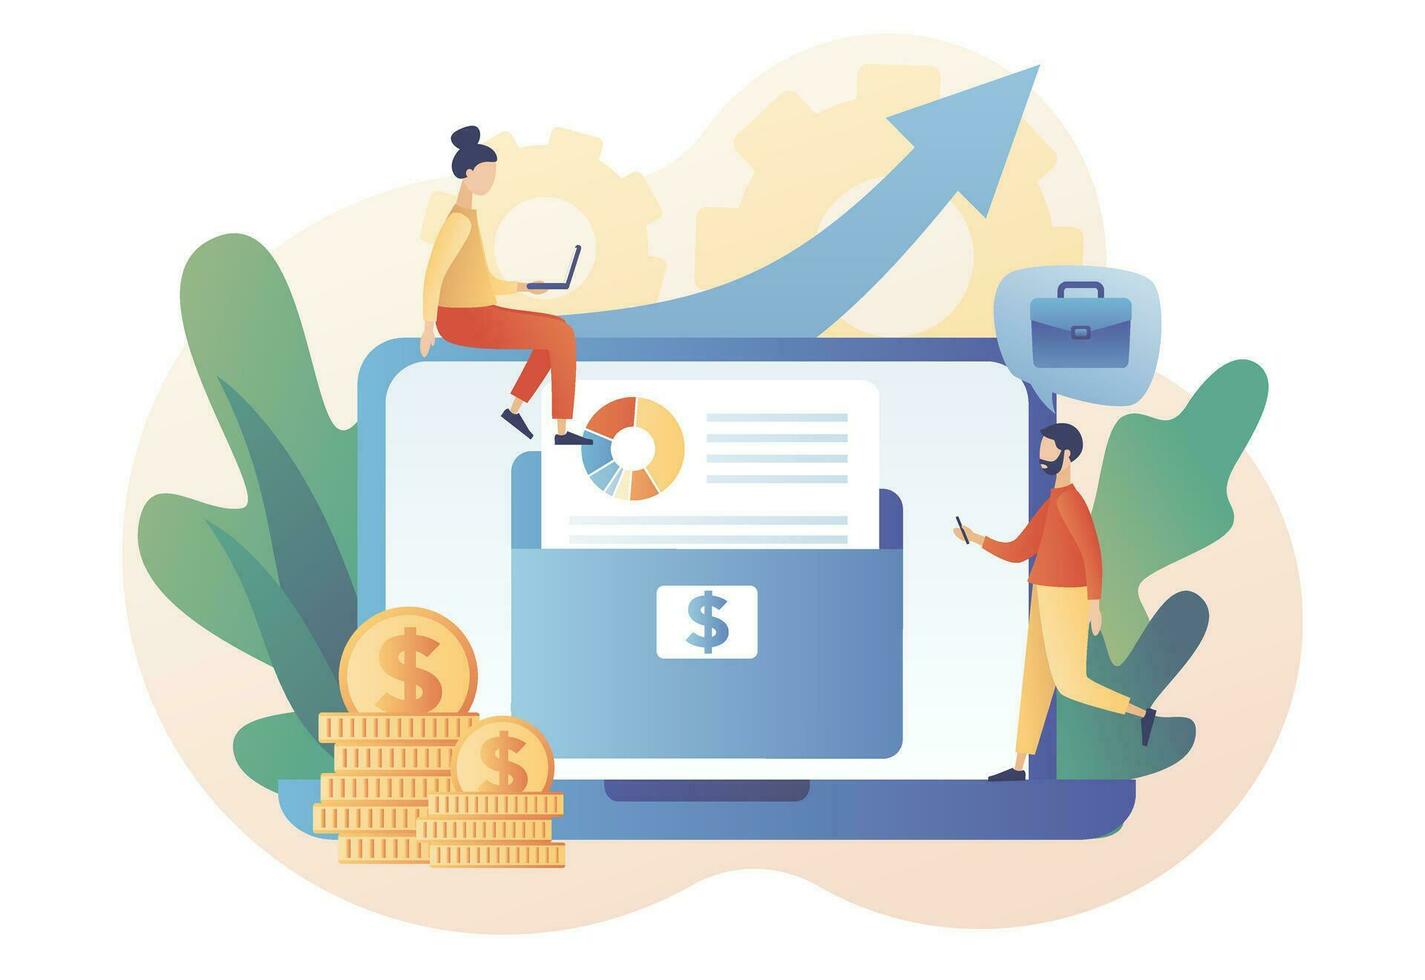 Tiny people with stock portfolio planning invest strategy, savings and budgets. Investment portfolio online. Diversified assets. Financial management concept. Modern flat cartoon style. Vector